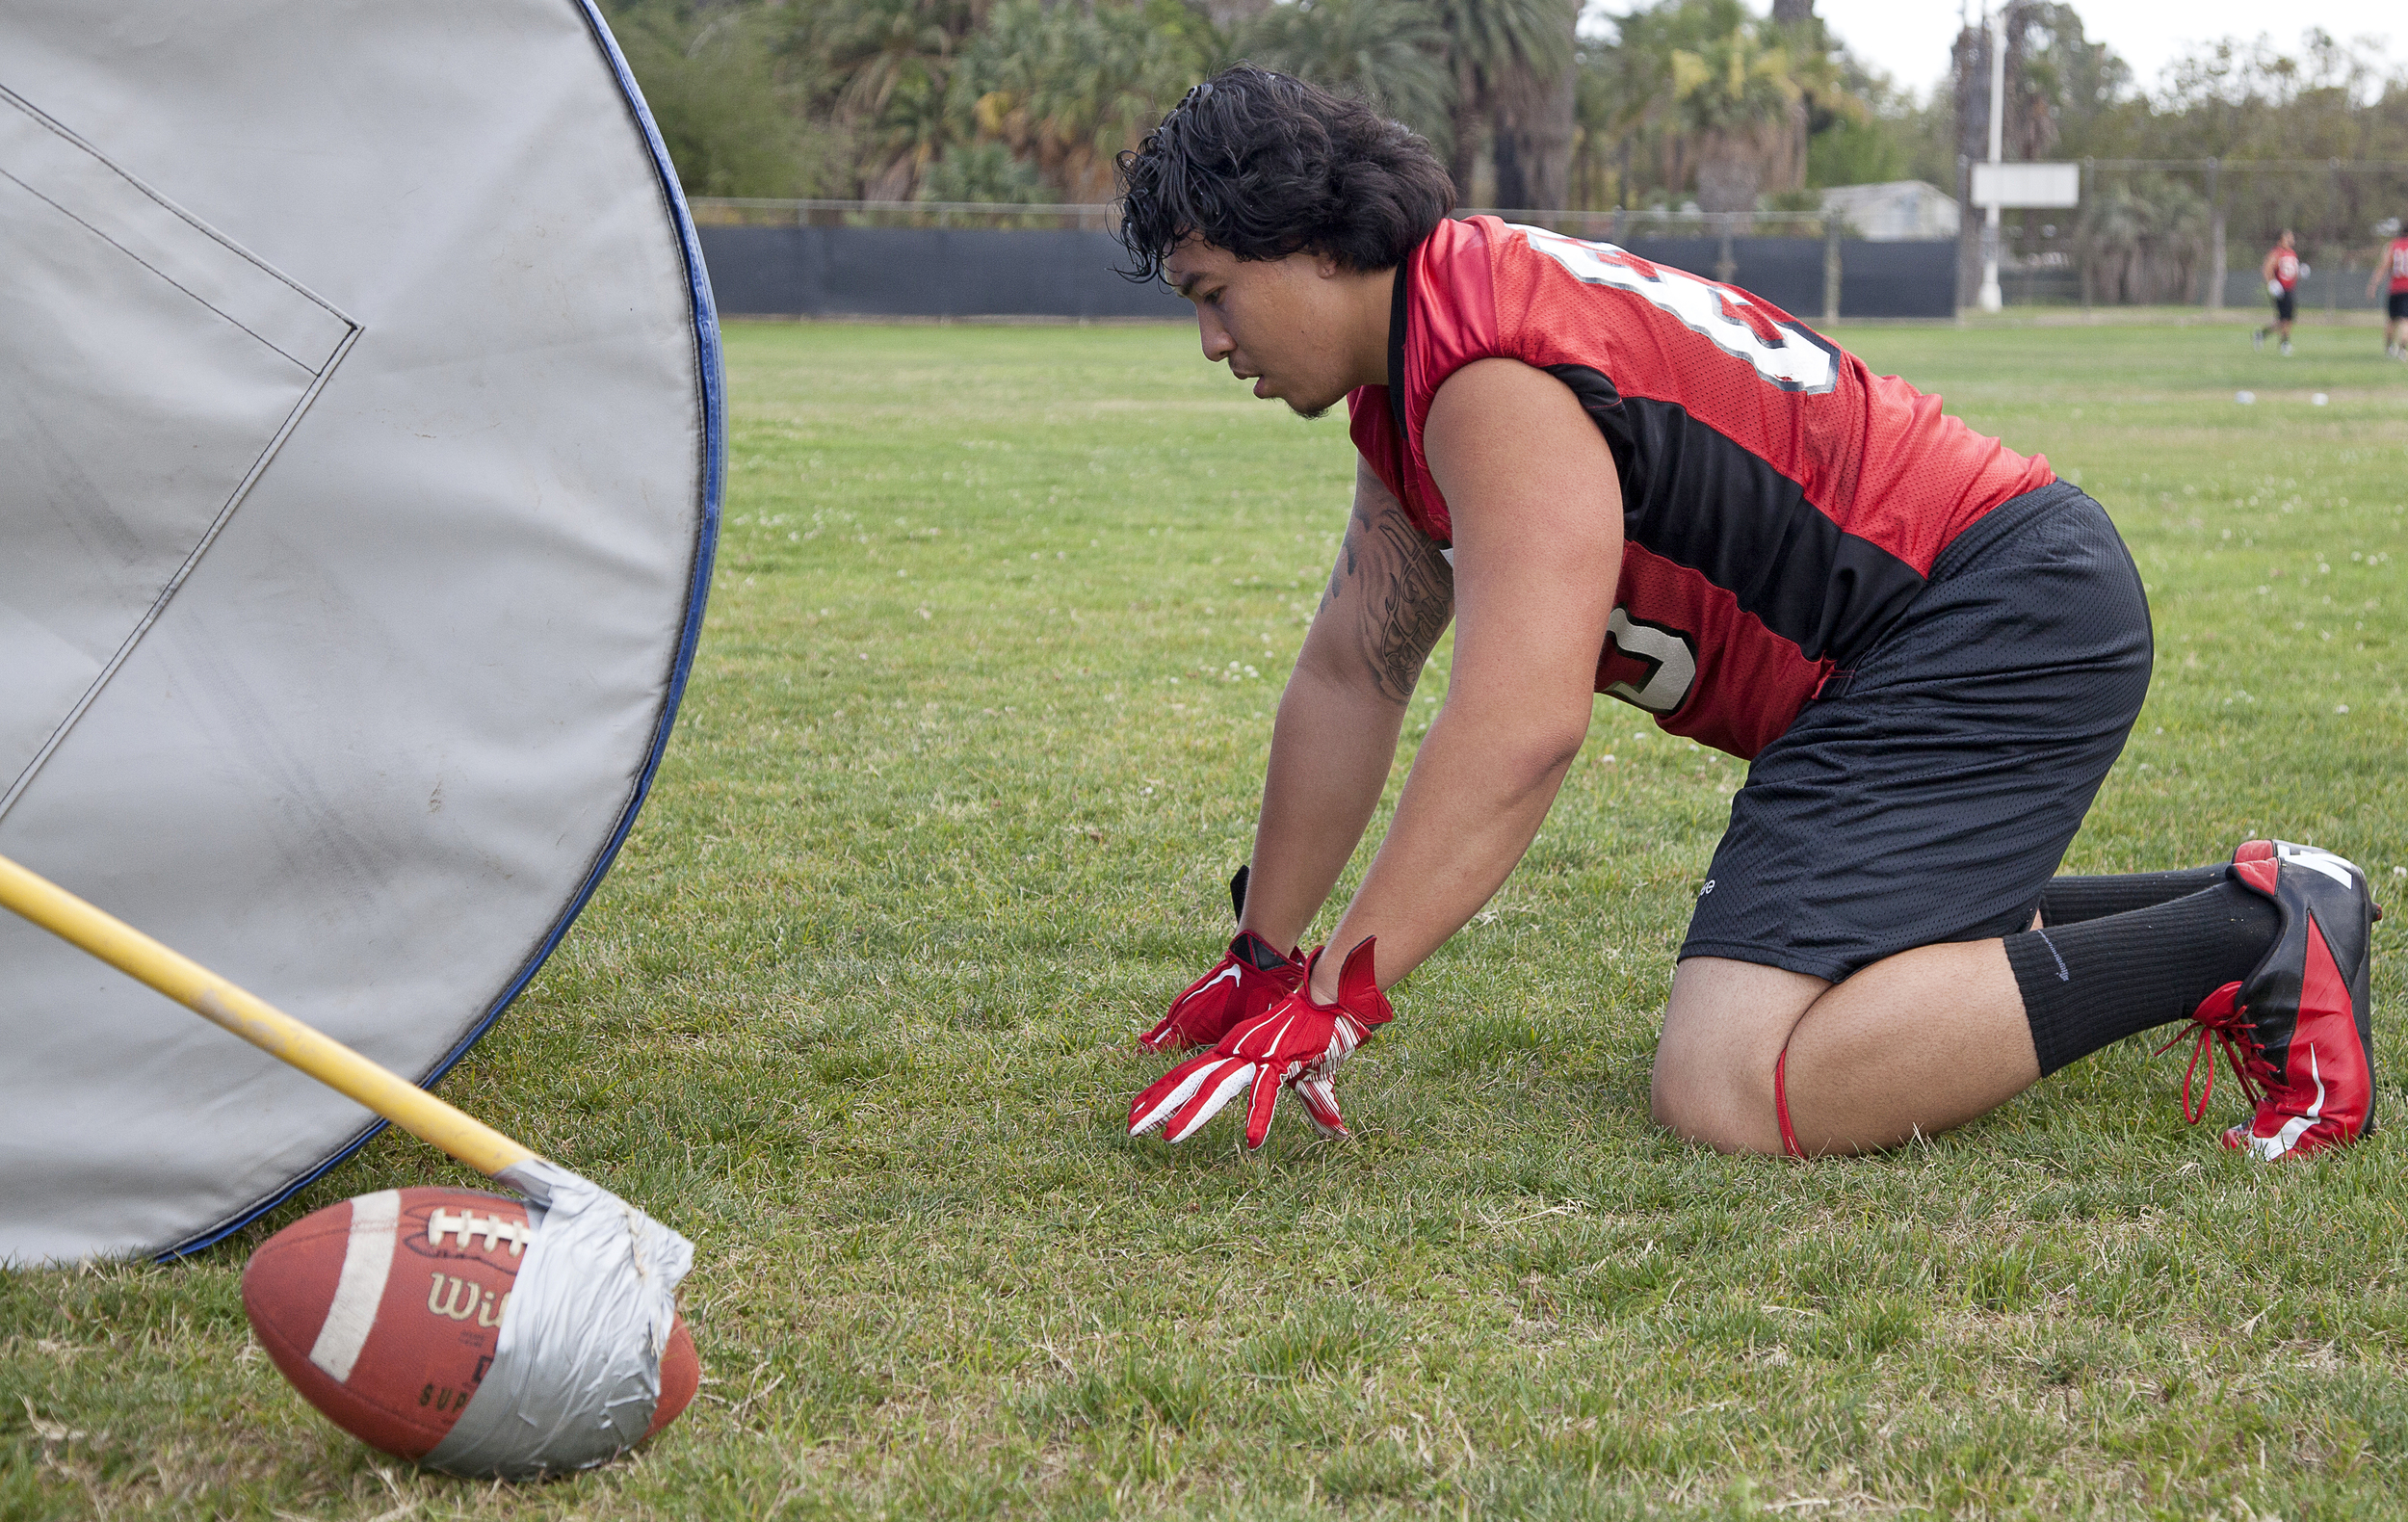  Defensive tackle Joe Achour readies to push a weighted cylinder during spring practice and training on Thursday, May 21, 2015. Pushing the cylinder is meant to help players push opposing players during a game. Woodland Hills, Calif.&nbsp; 